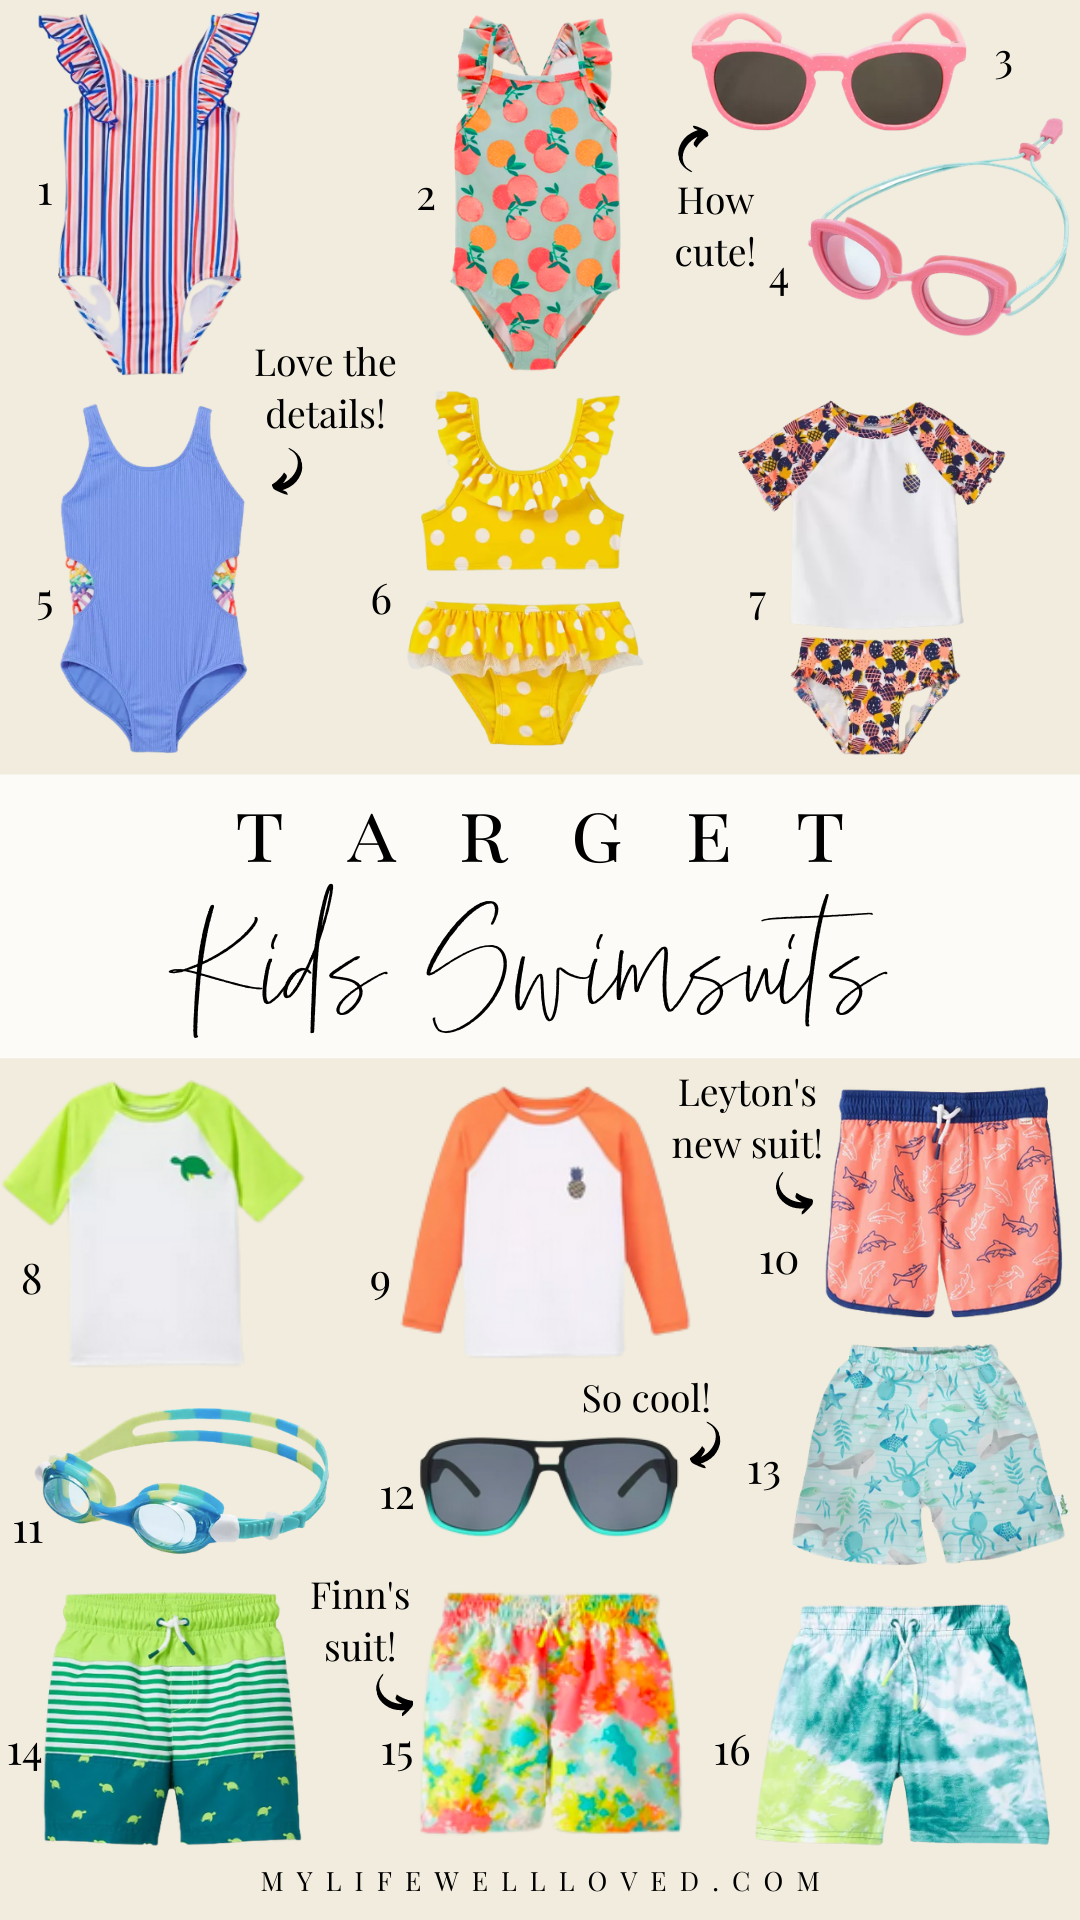 Littles Swim In Style: The Best Target Kids Swimwear by Alabama Family + Style blogger, Heather Brown // My Life Well Loved